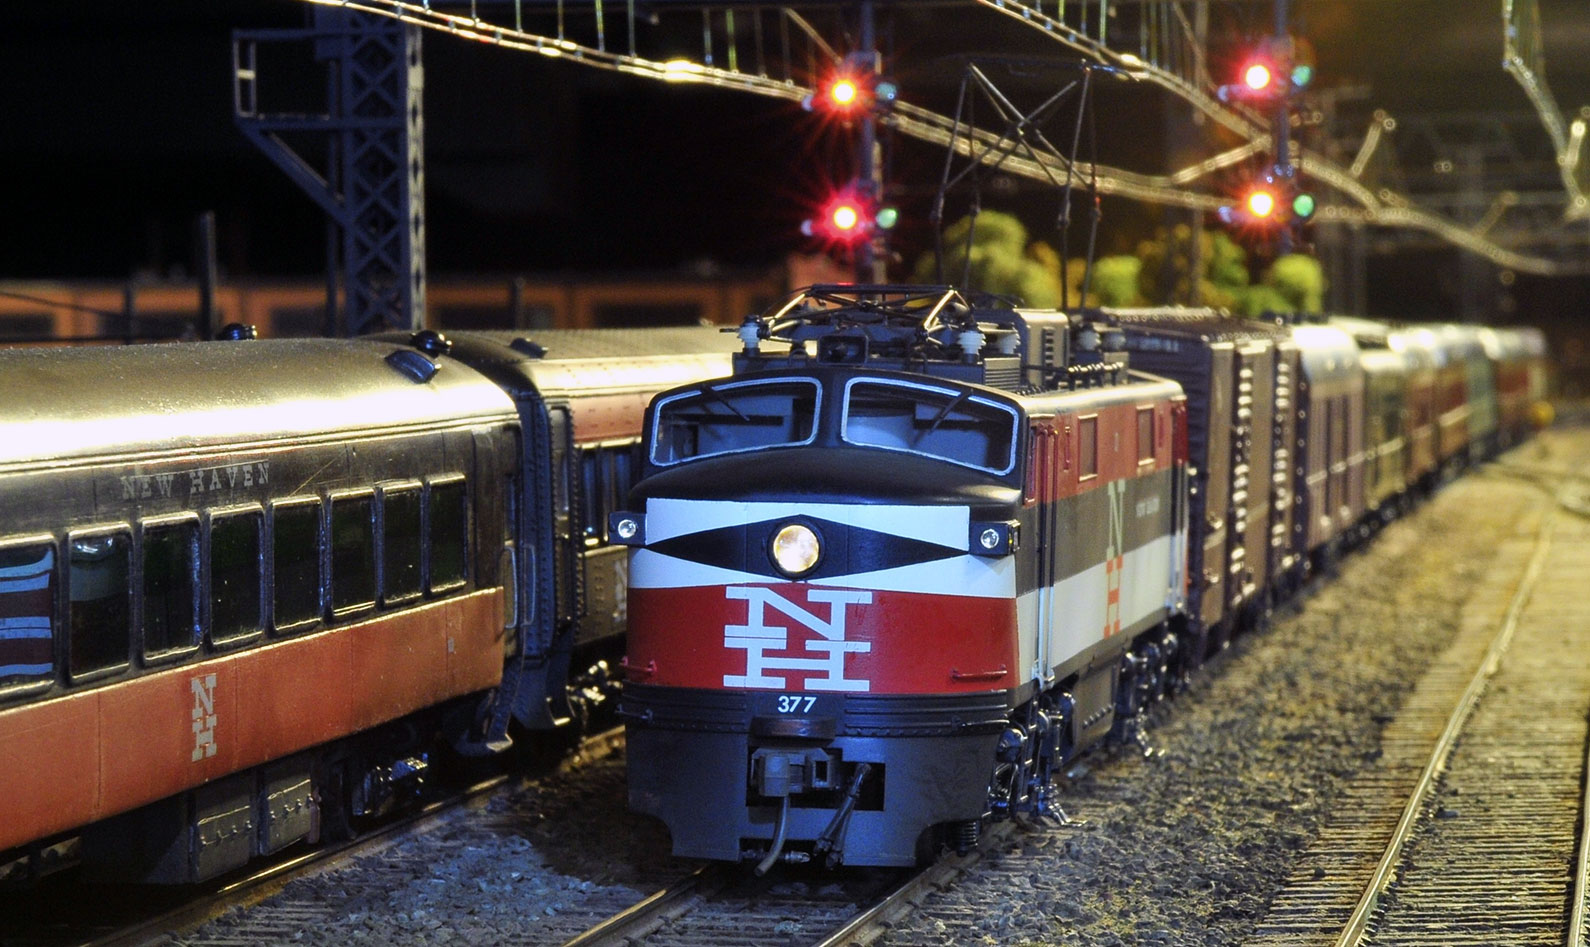 The Stamford Model Railroad Club Annual Open House is being held TWO Saturdays after Thanksgiving!